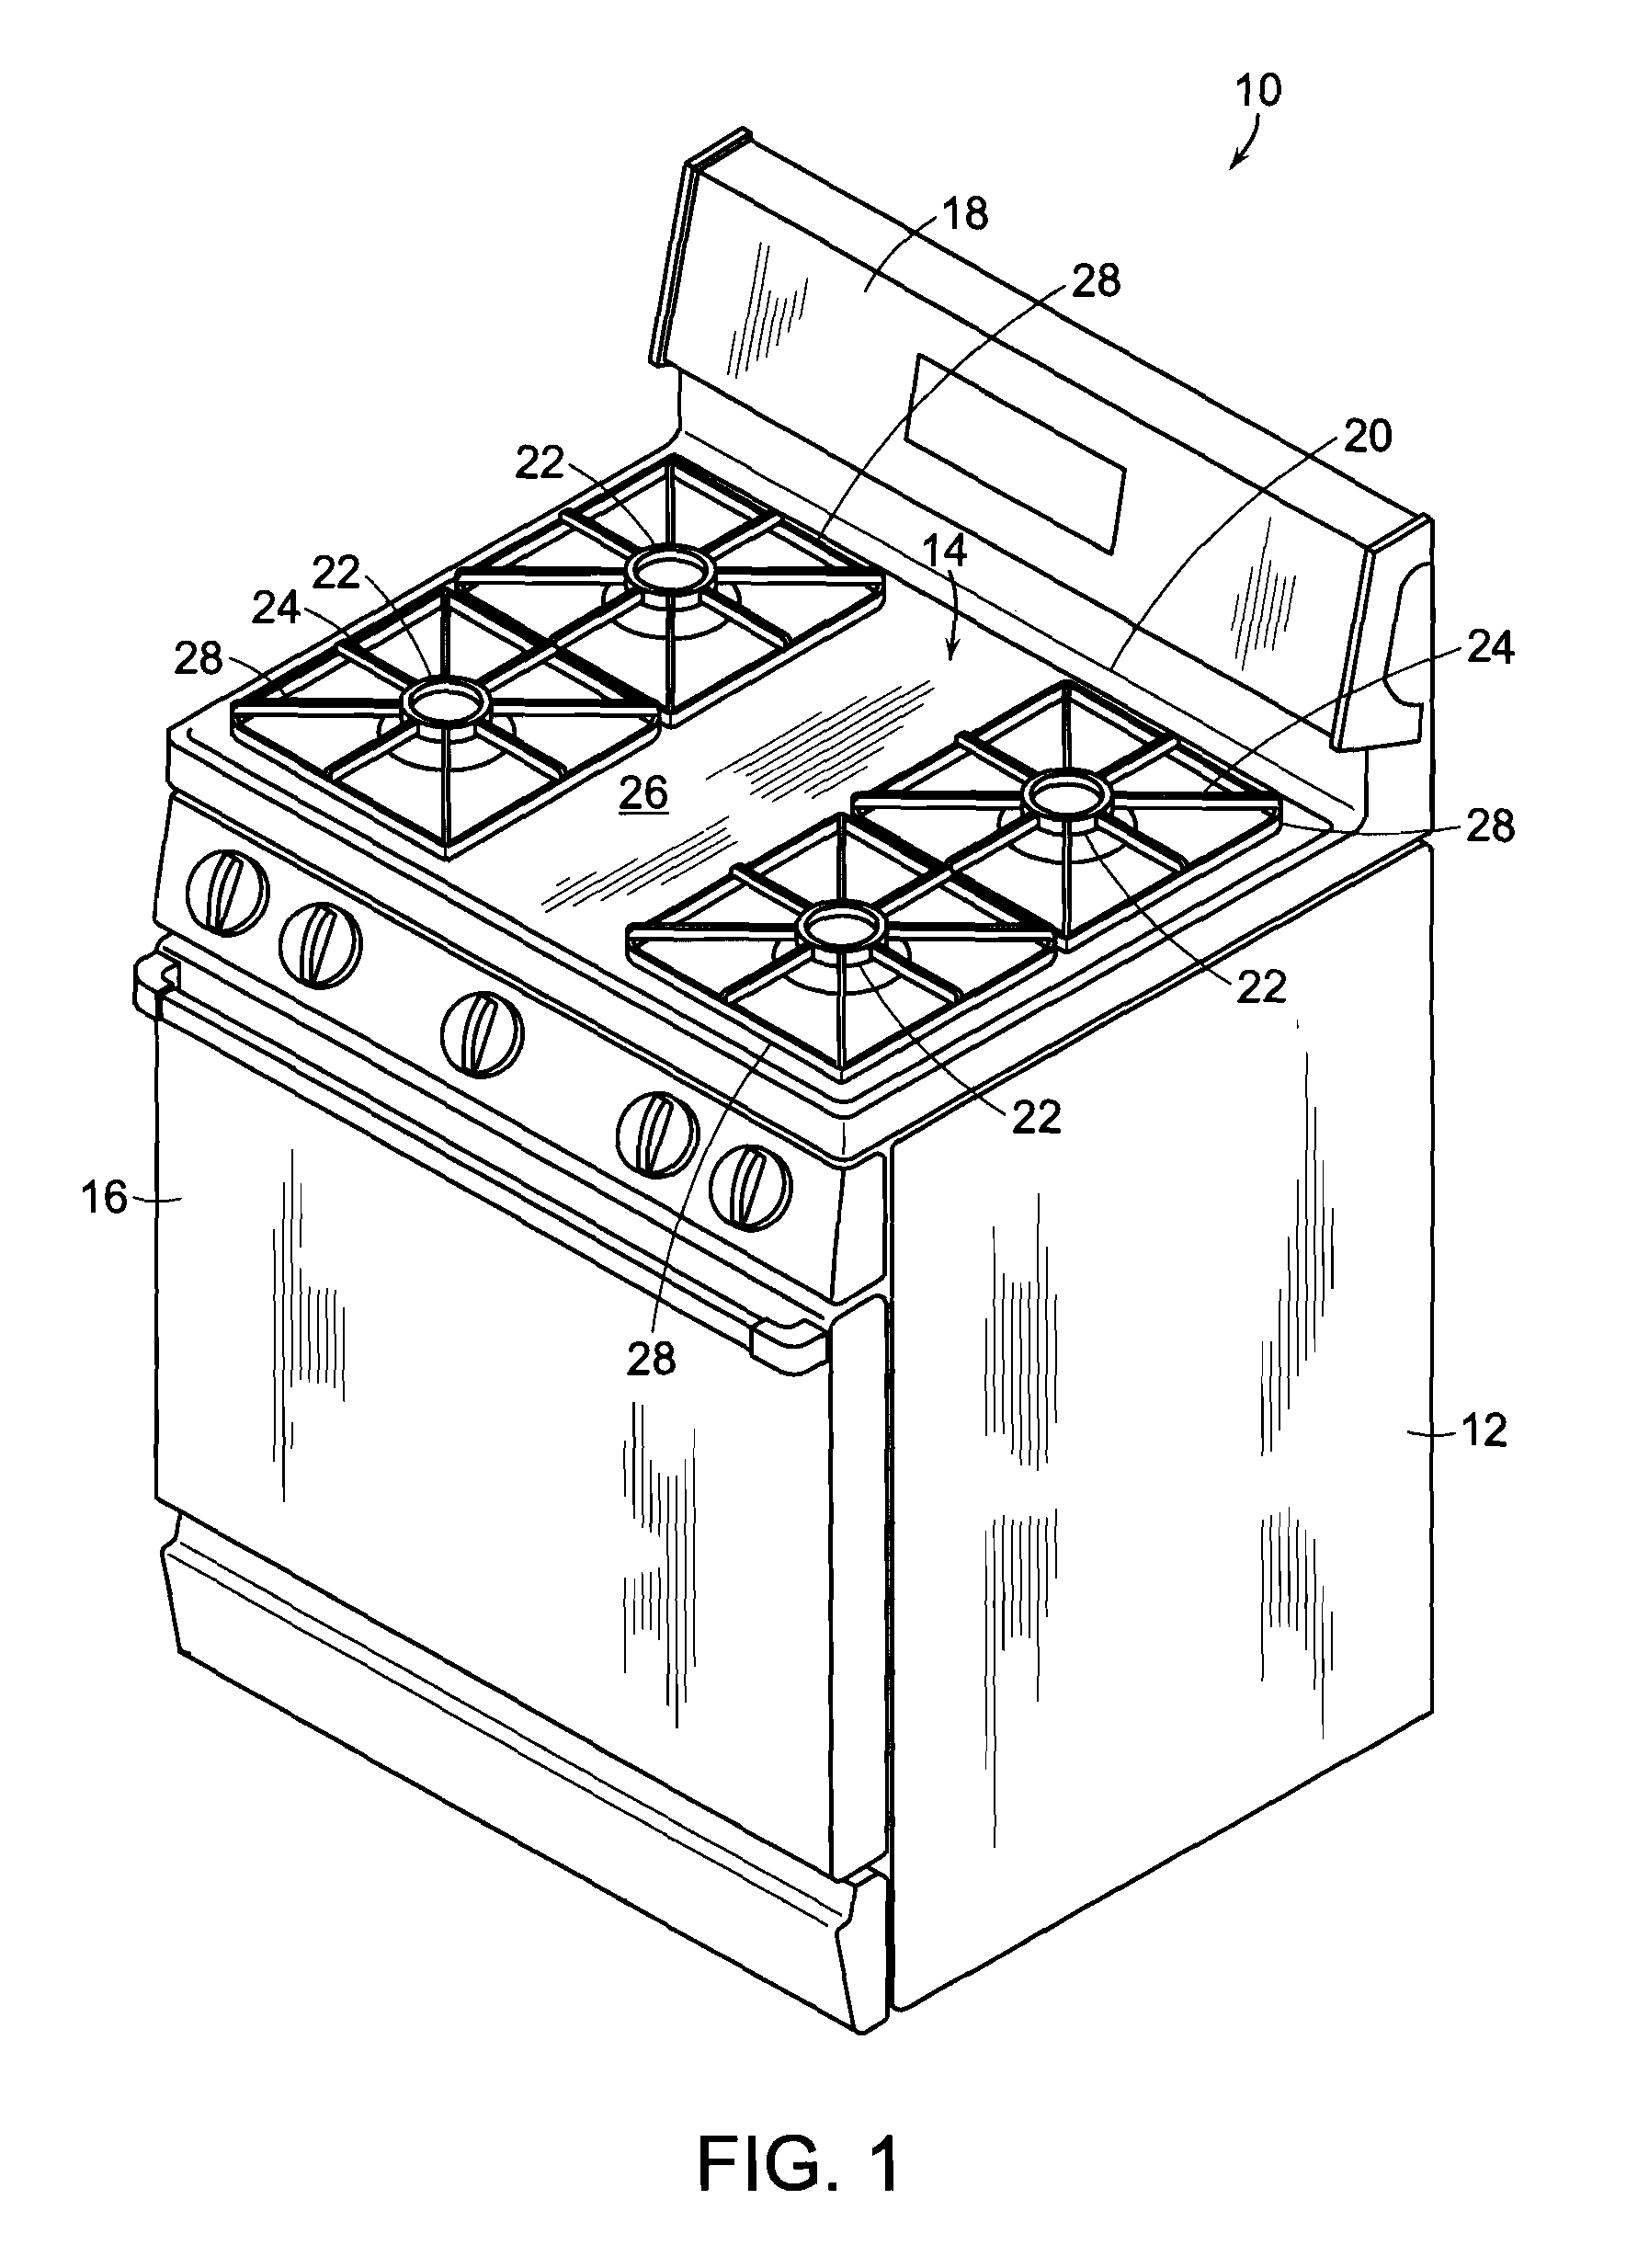 Fuel gas ignition system for gas burners including devices and methods related thereto